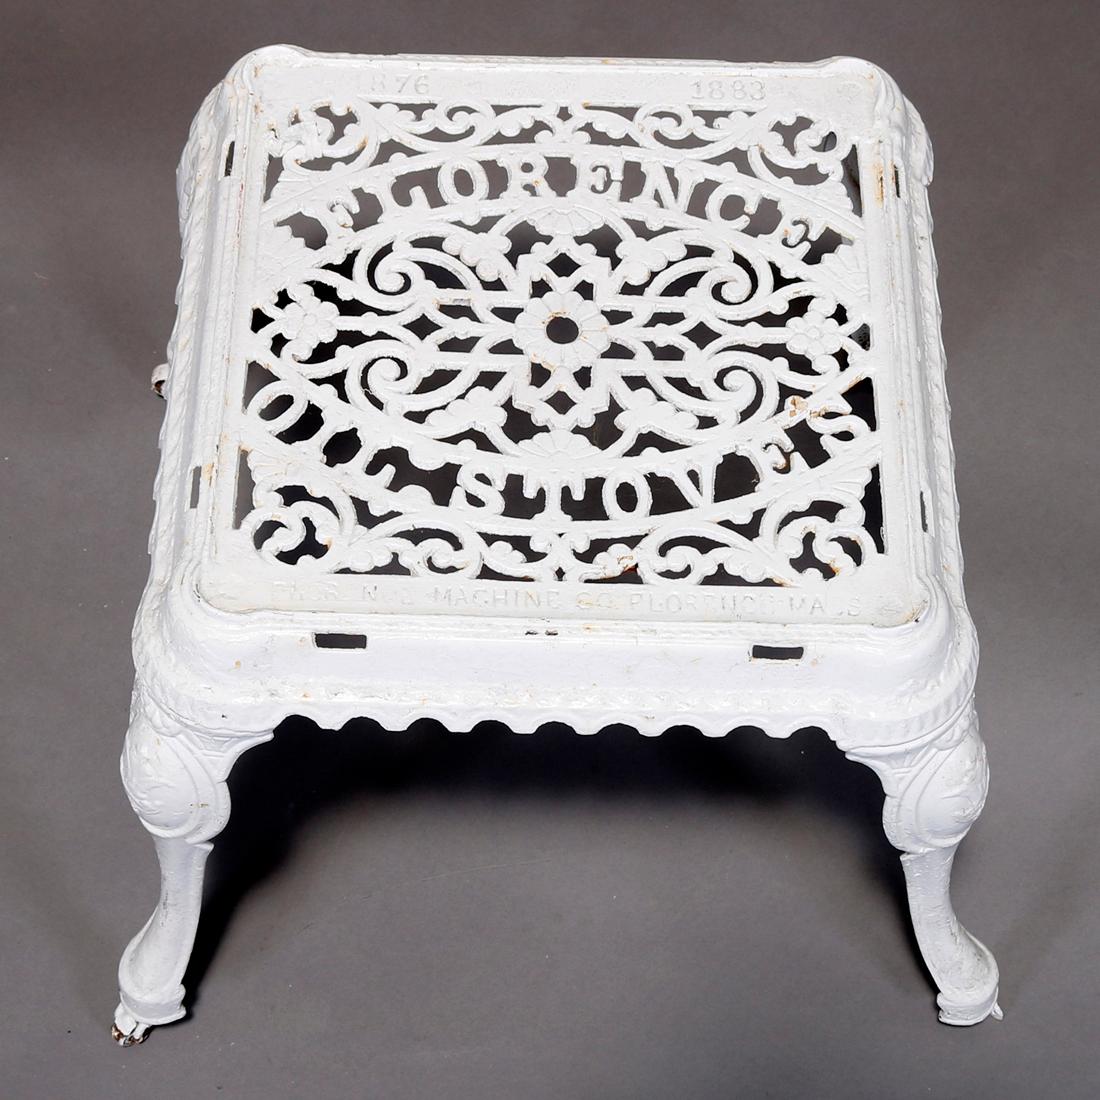 An antique Victorian advertising stand offers cast iron construction with pierced foliated filigree top having 